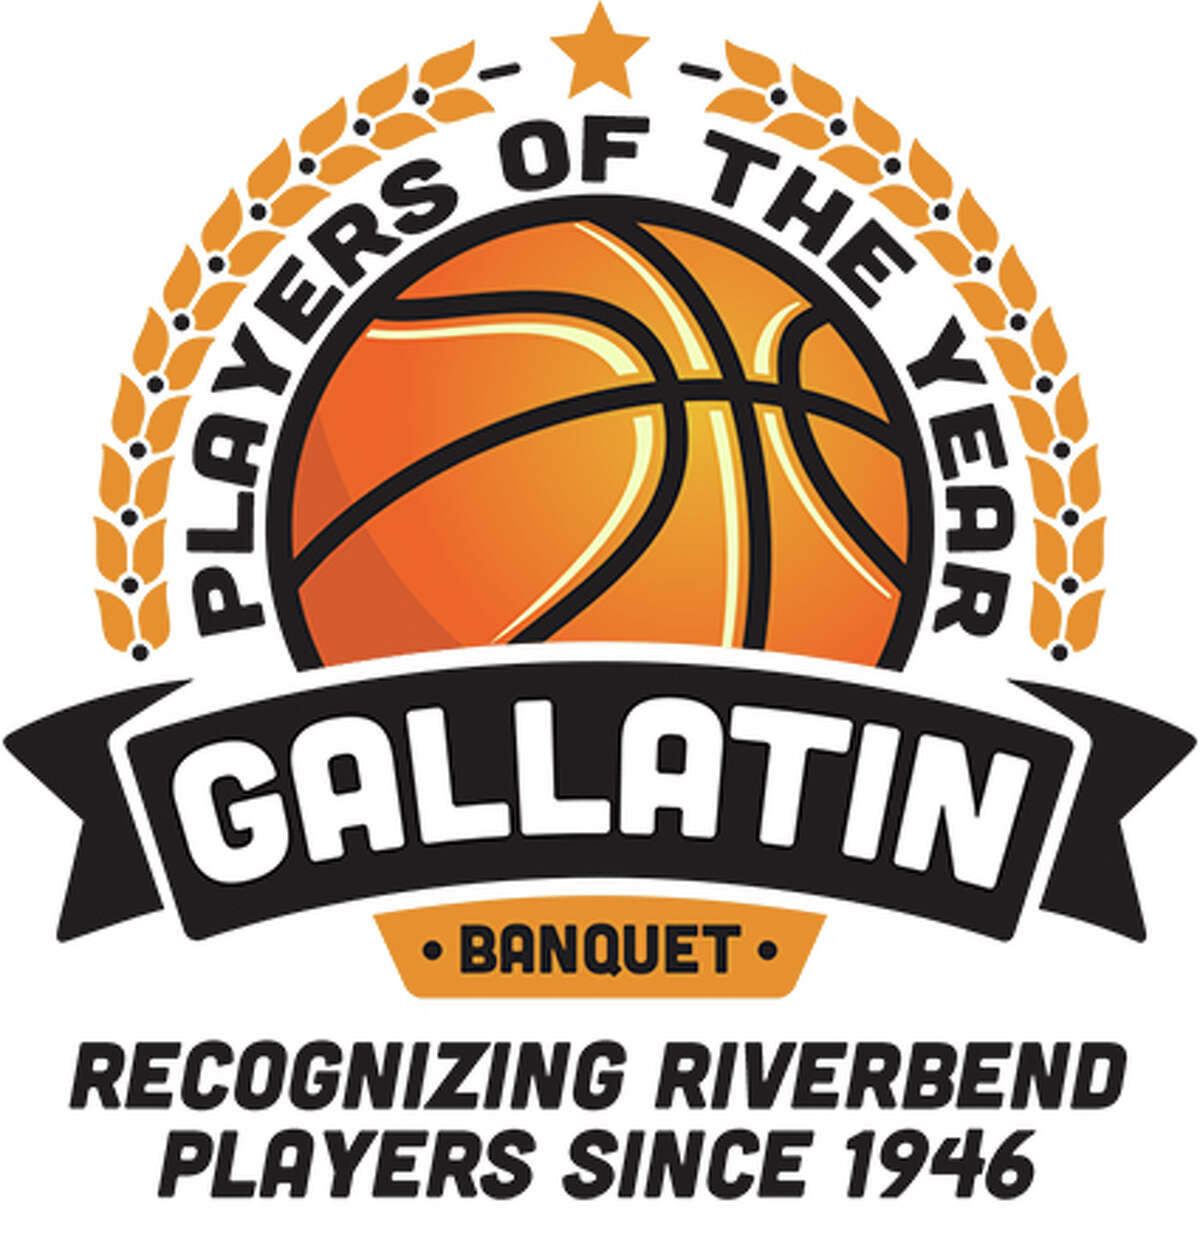 The 75th Gallatin Basketball Players of the Year Banquet will take place at Best Western Premier Alton-St. Louis Area Hotel, 3559 College Ave., in Alton at 6 p.m. Sunday, March 20.